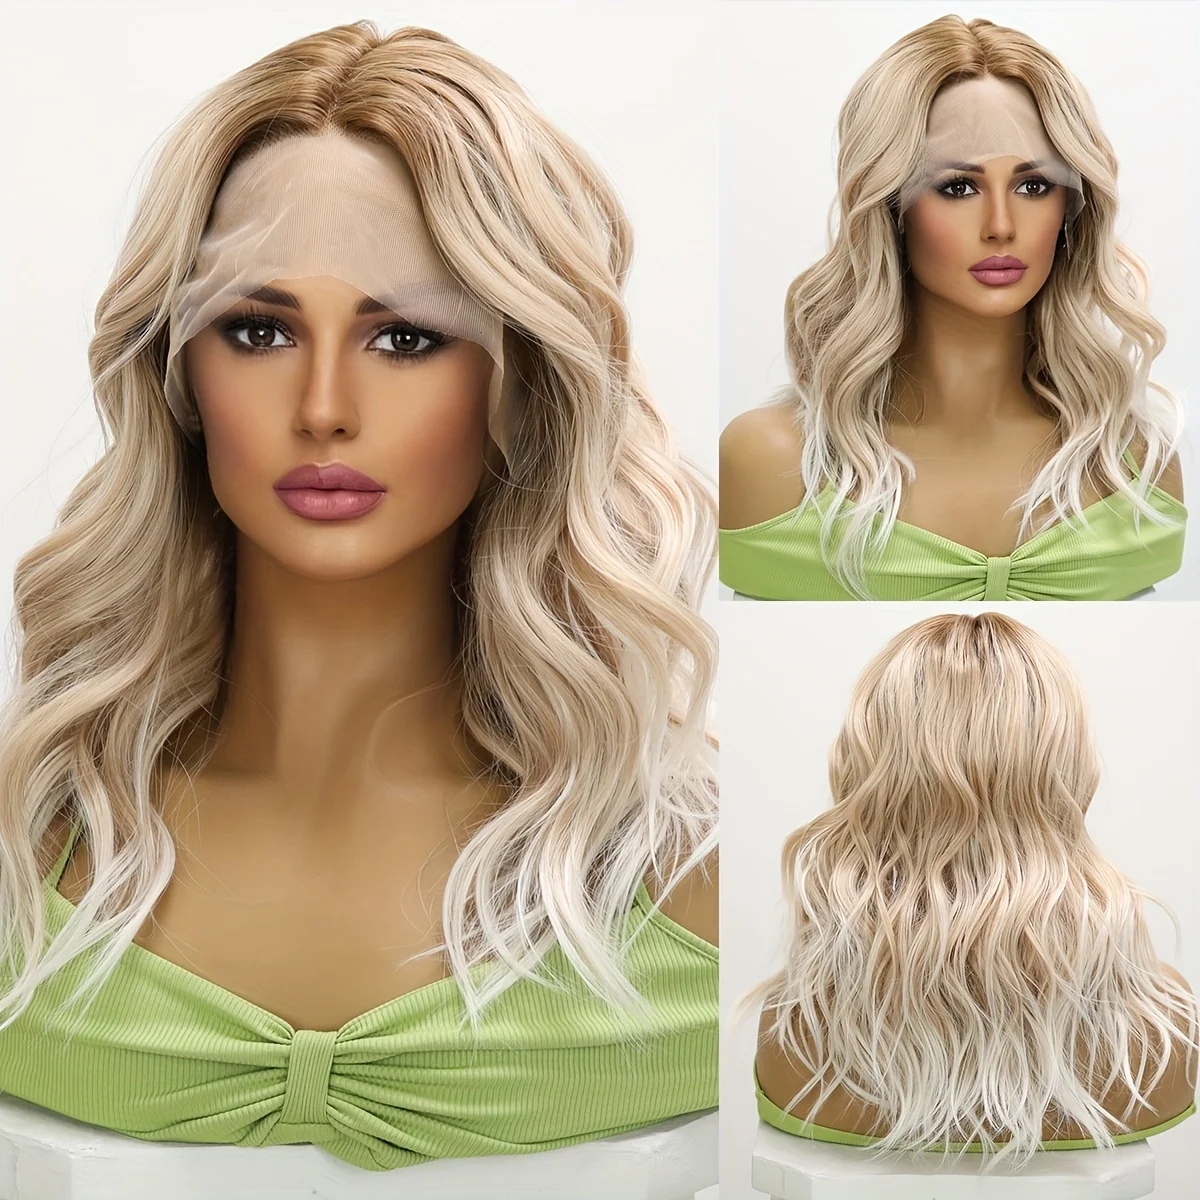 

Handmade Lace Wigs For Women Mixed With Gold And White Dyed Gradient Colors Medium To Long Daily Curls For Women